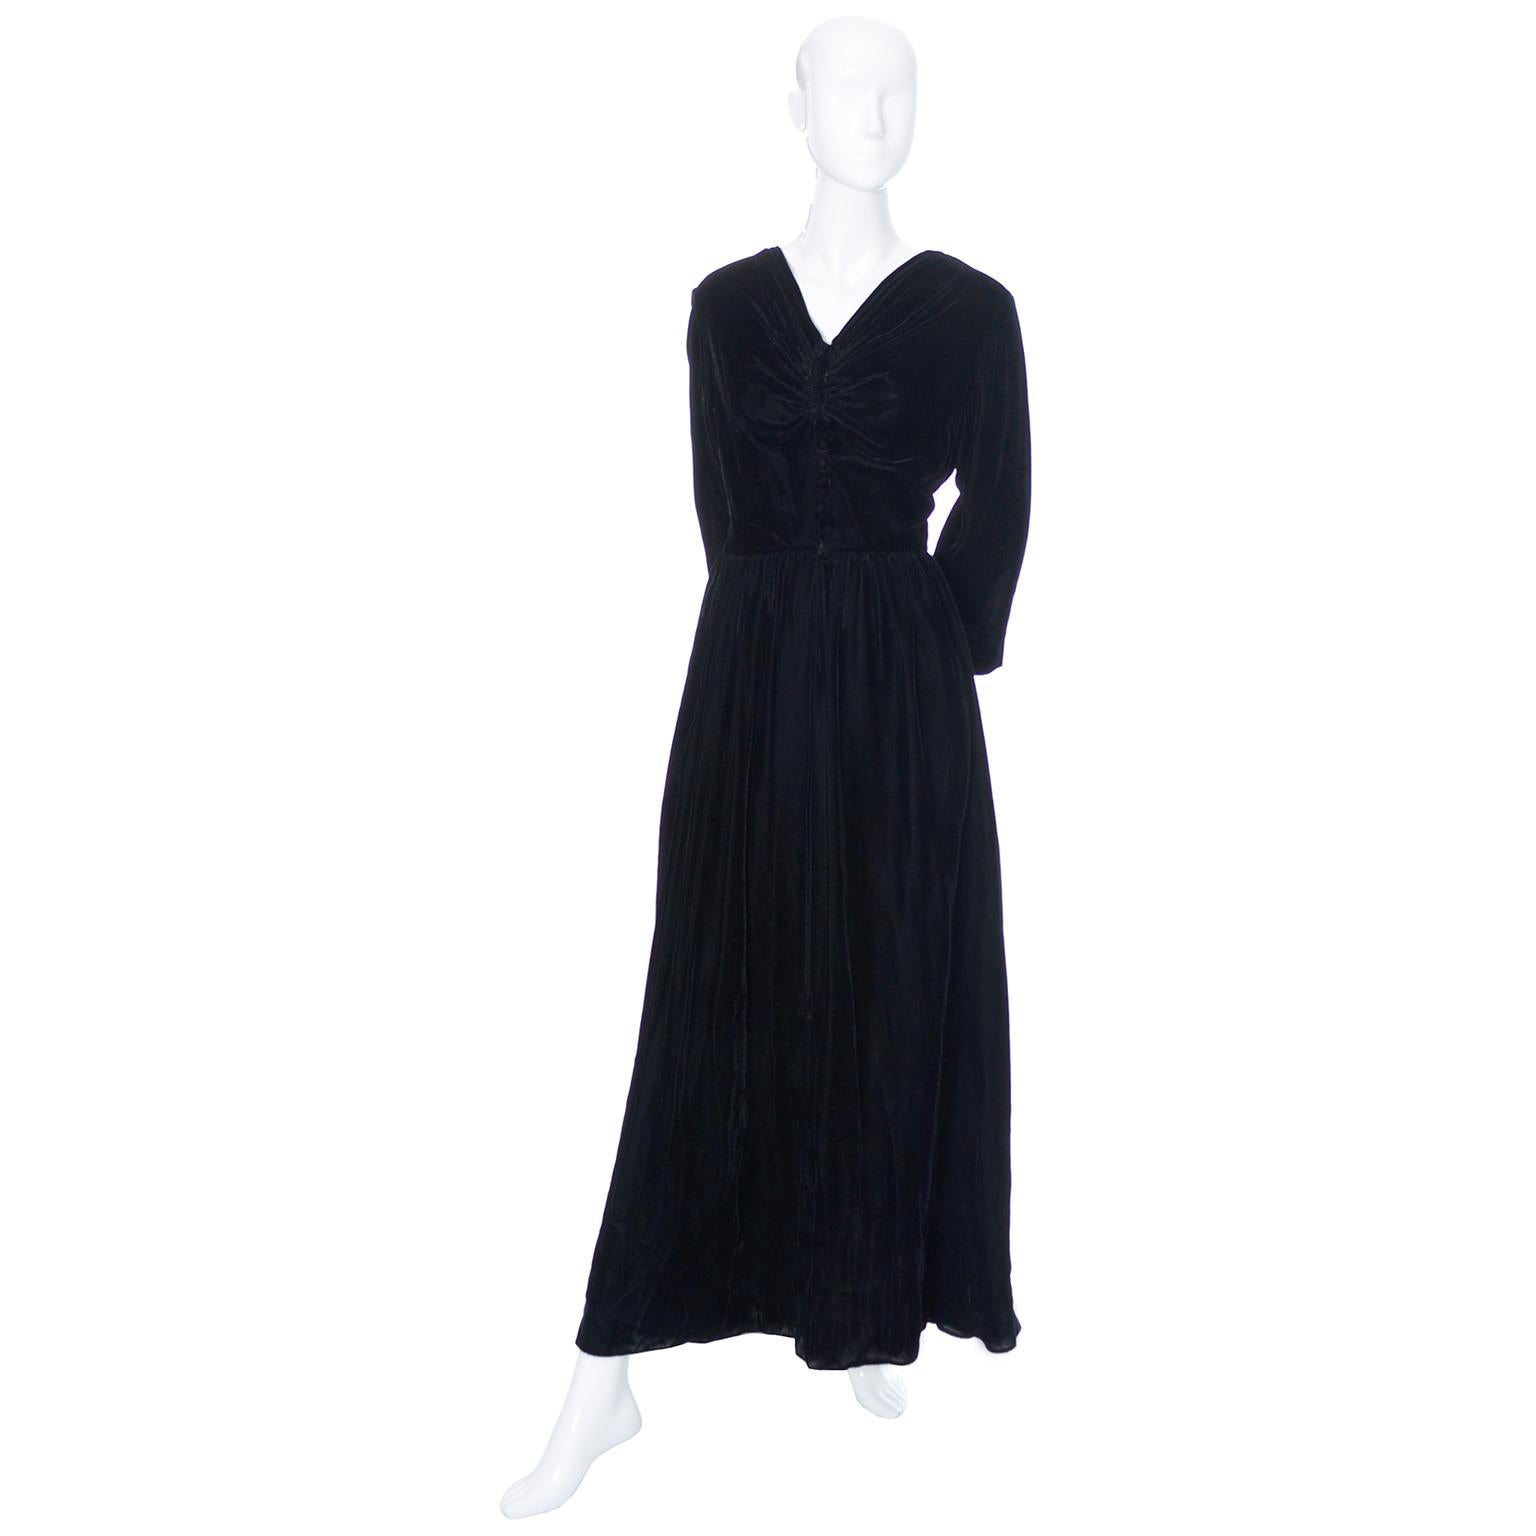 This vintage early 1940s black velvet gown by Kamore was originally designed to be a hostess gown or luxurious loungewear for the 40's woman who entertained in style.  Though they aren't worn as hostess gowns anymore, we think these pieces make